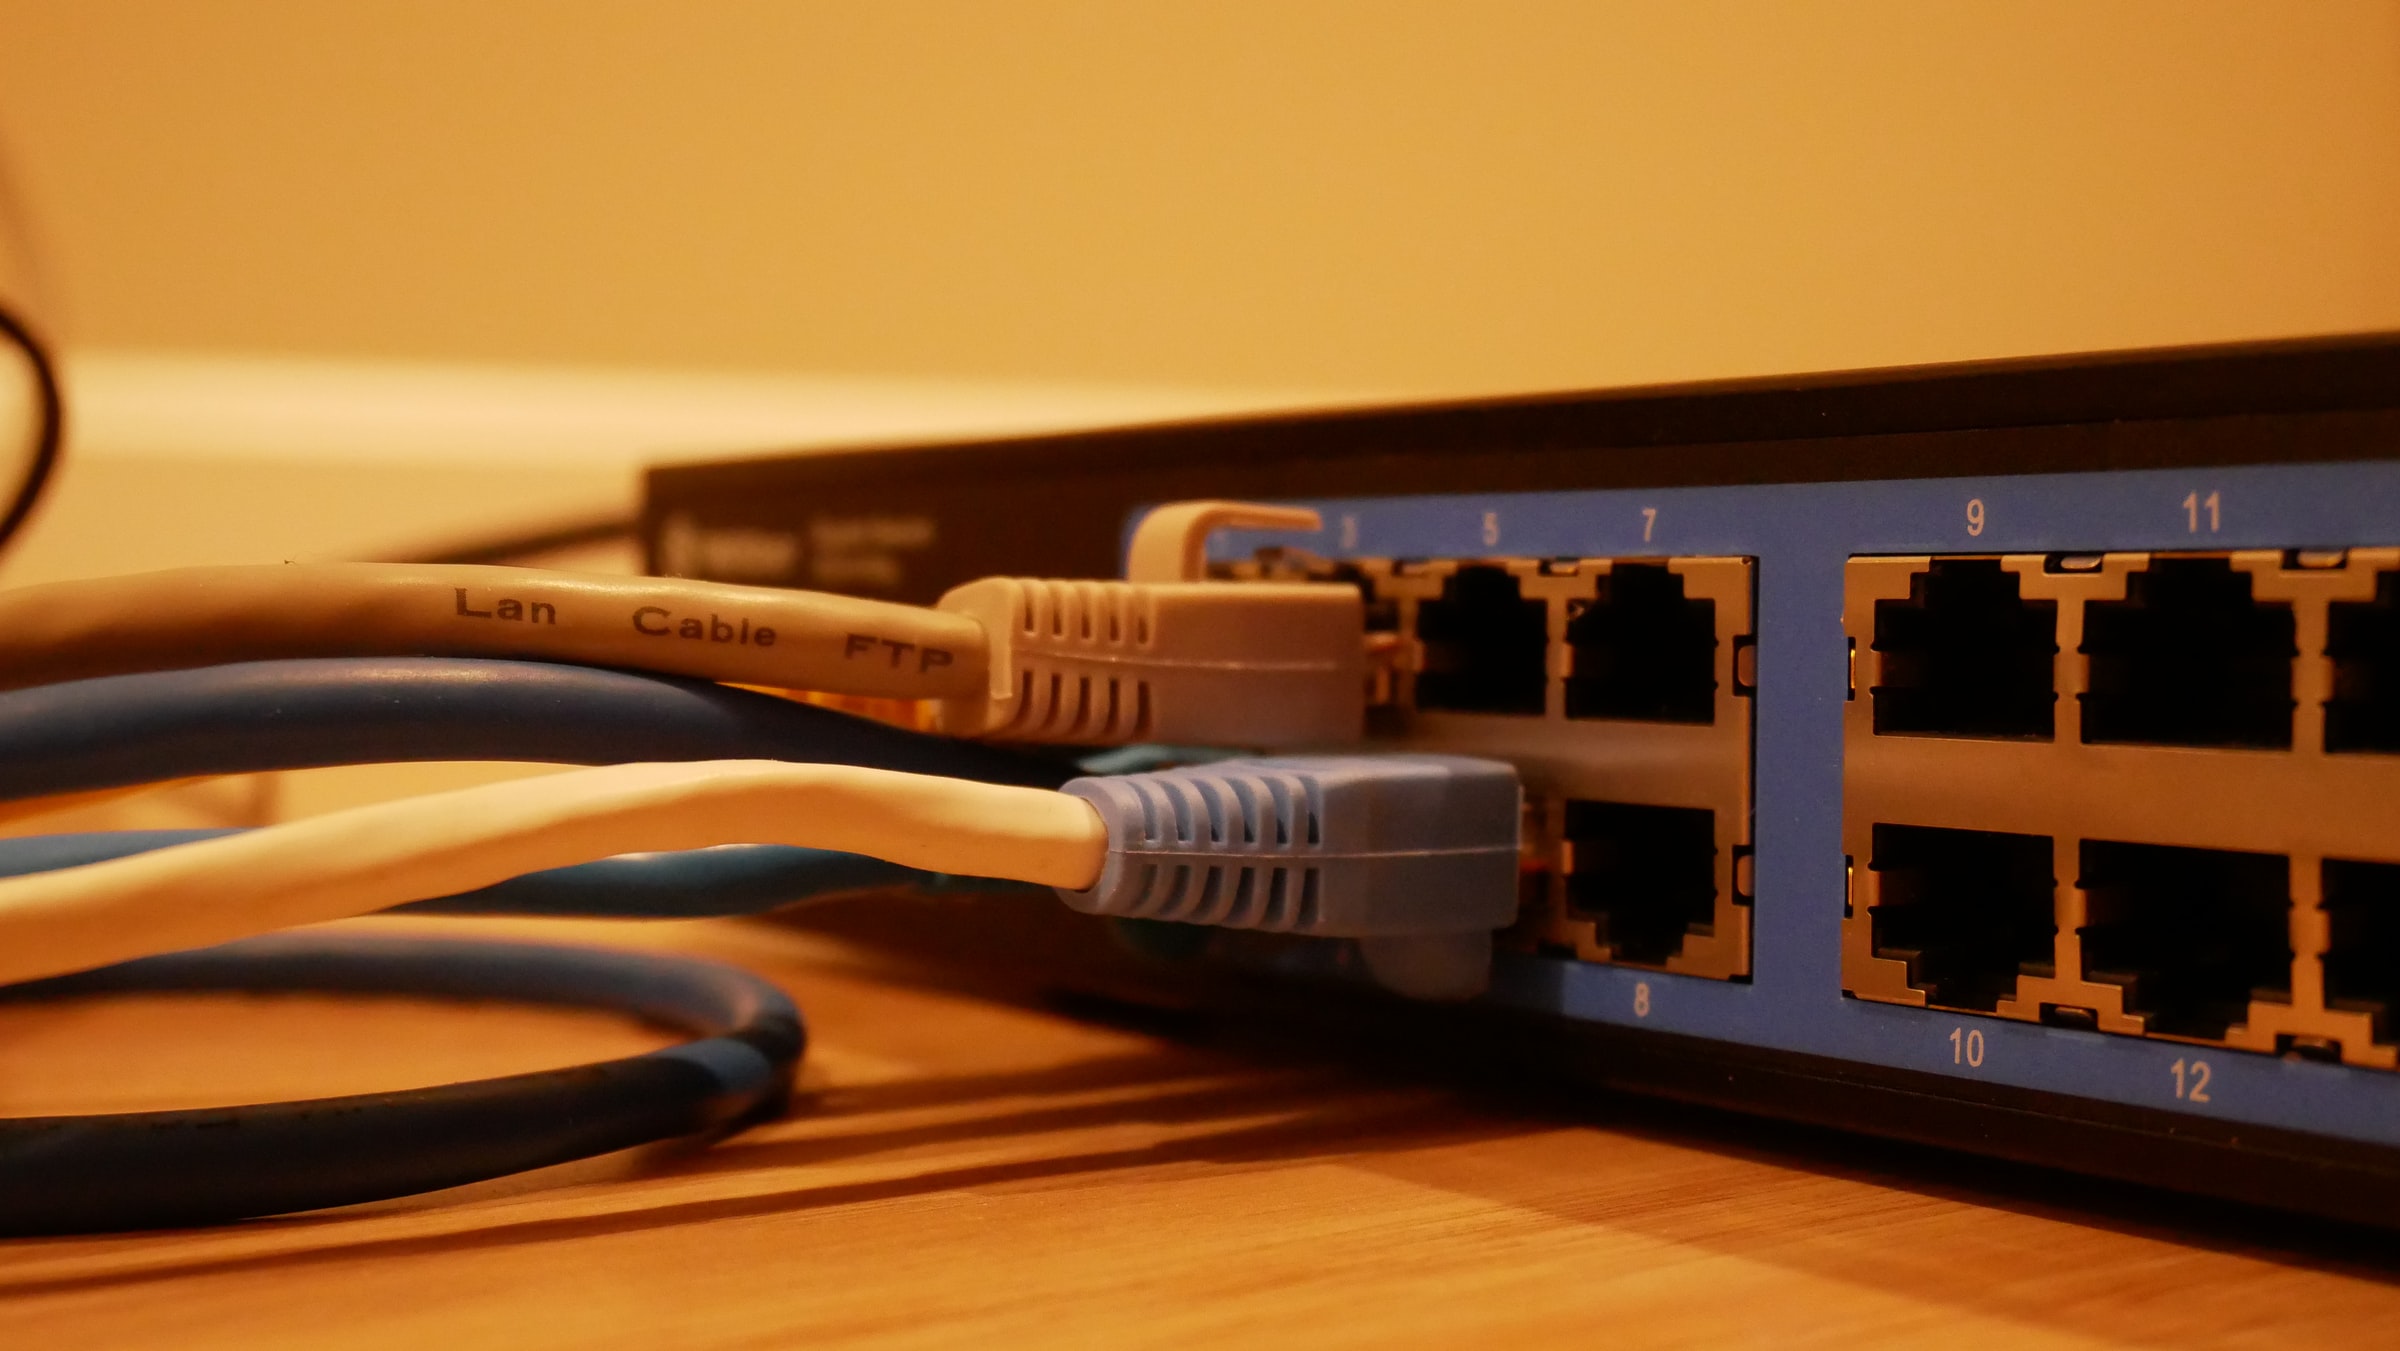 A ethernet cables connecting to a hub.